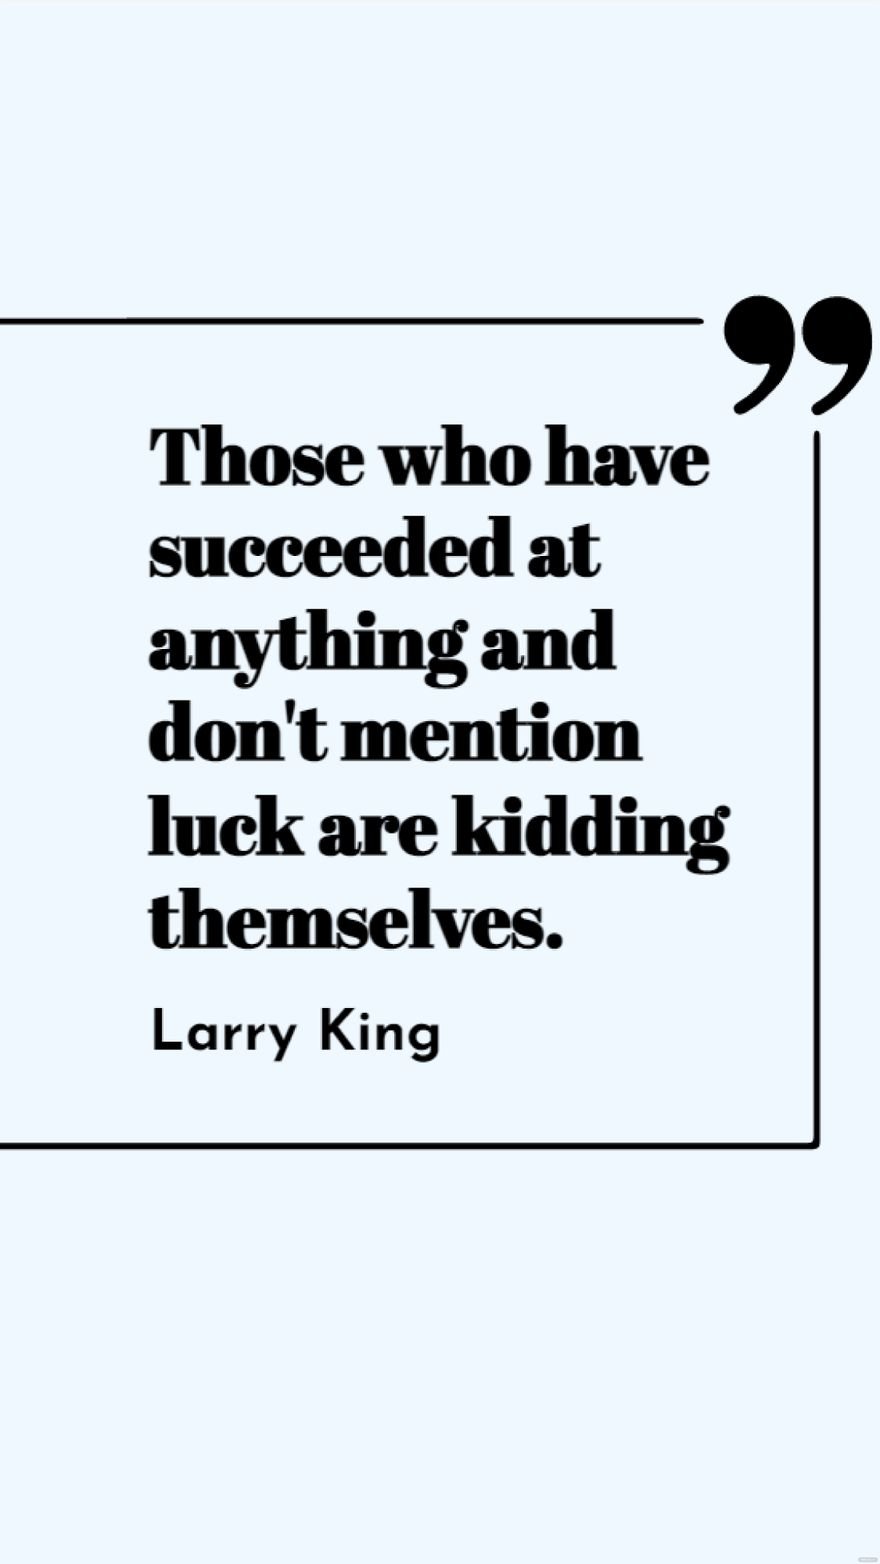 Larry King - Those who have succeeded at anything and don't mention luck are kidding themselves.